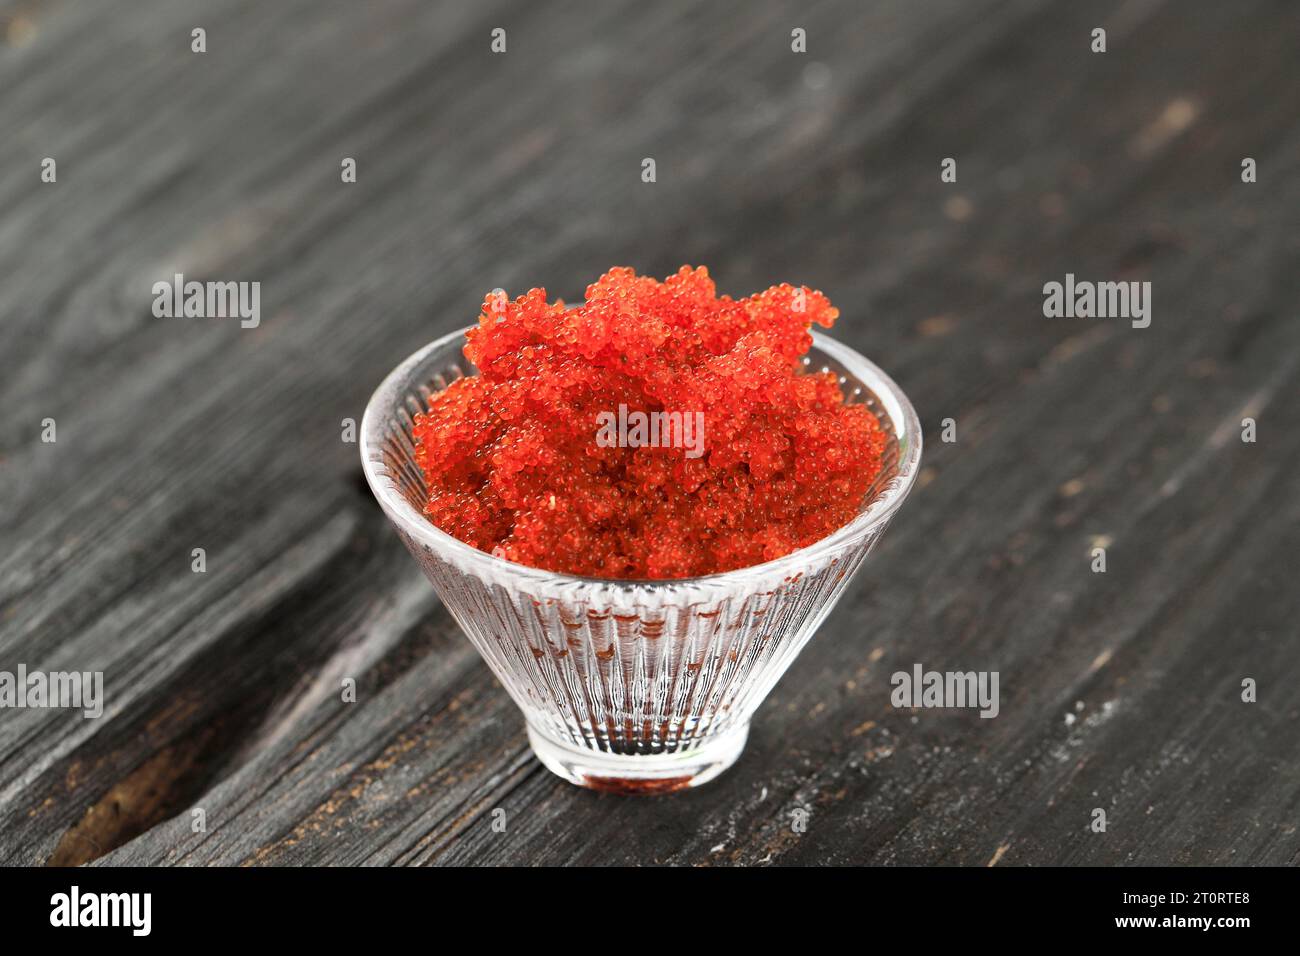 Tobiko or Flying Fish Roe - An example of the strange or weird food eaten  by people around the world Stock Photo - Alamy